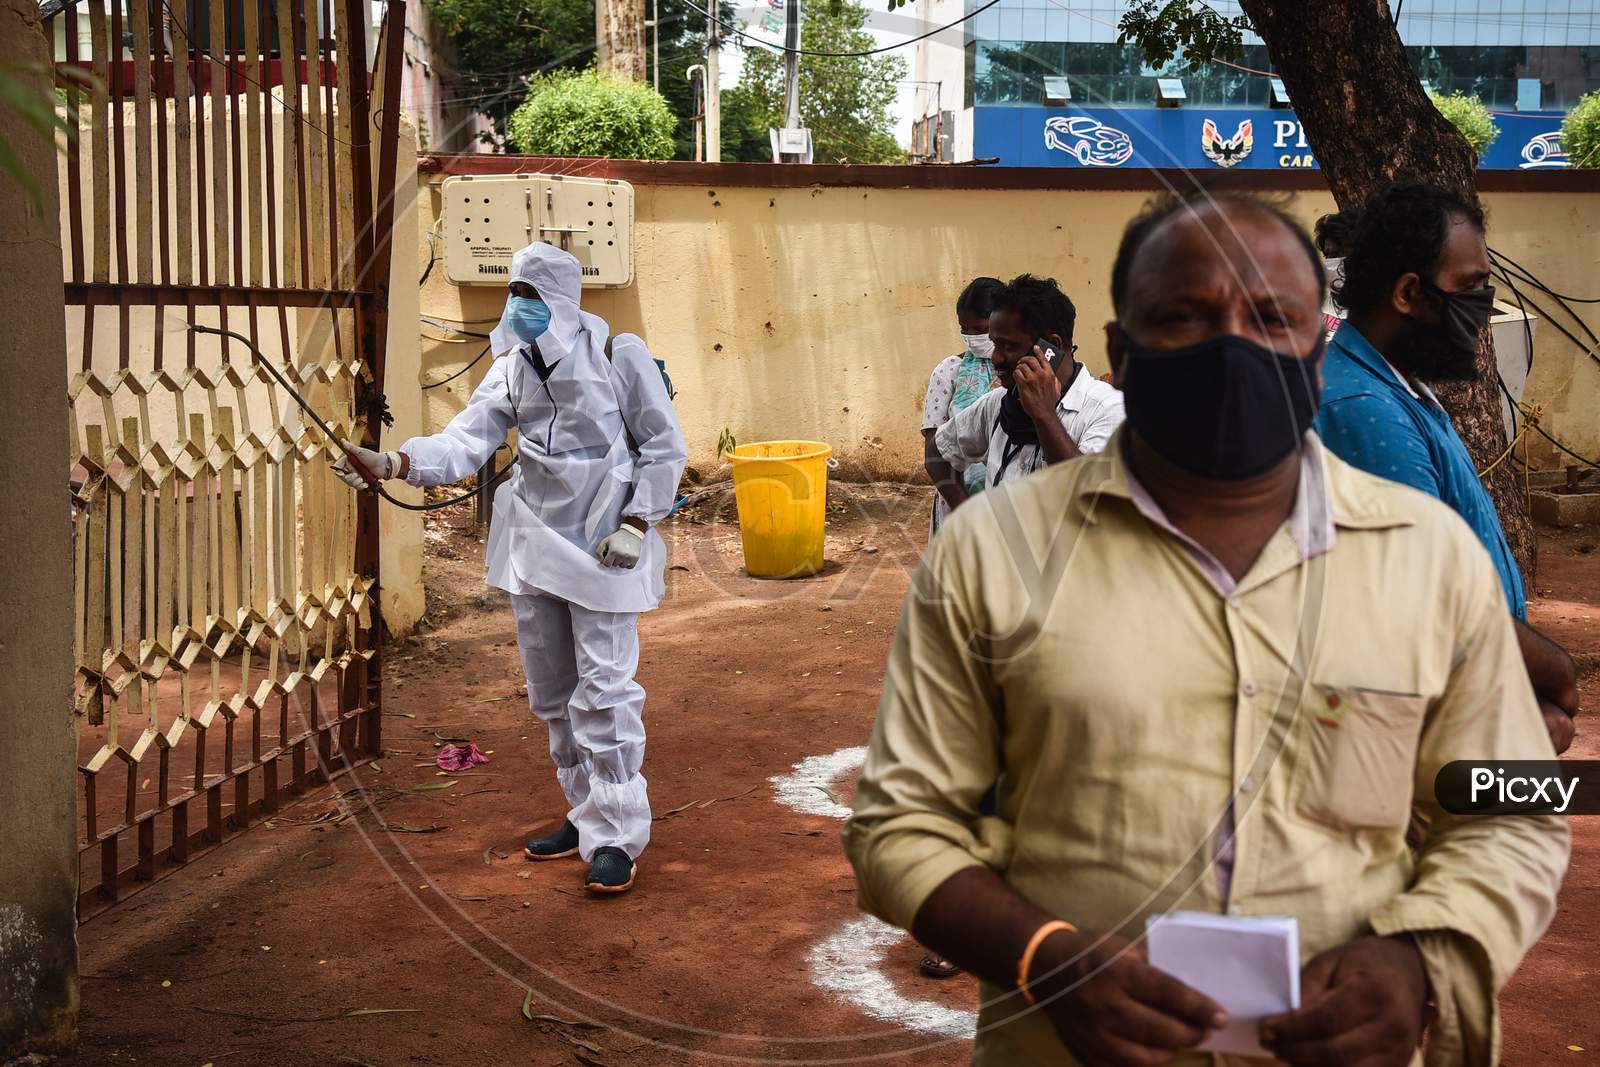 A corporation worker sanitizes the area as people wait for the COVID-19 test in Vijayawada.